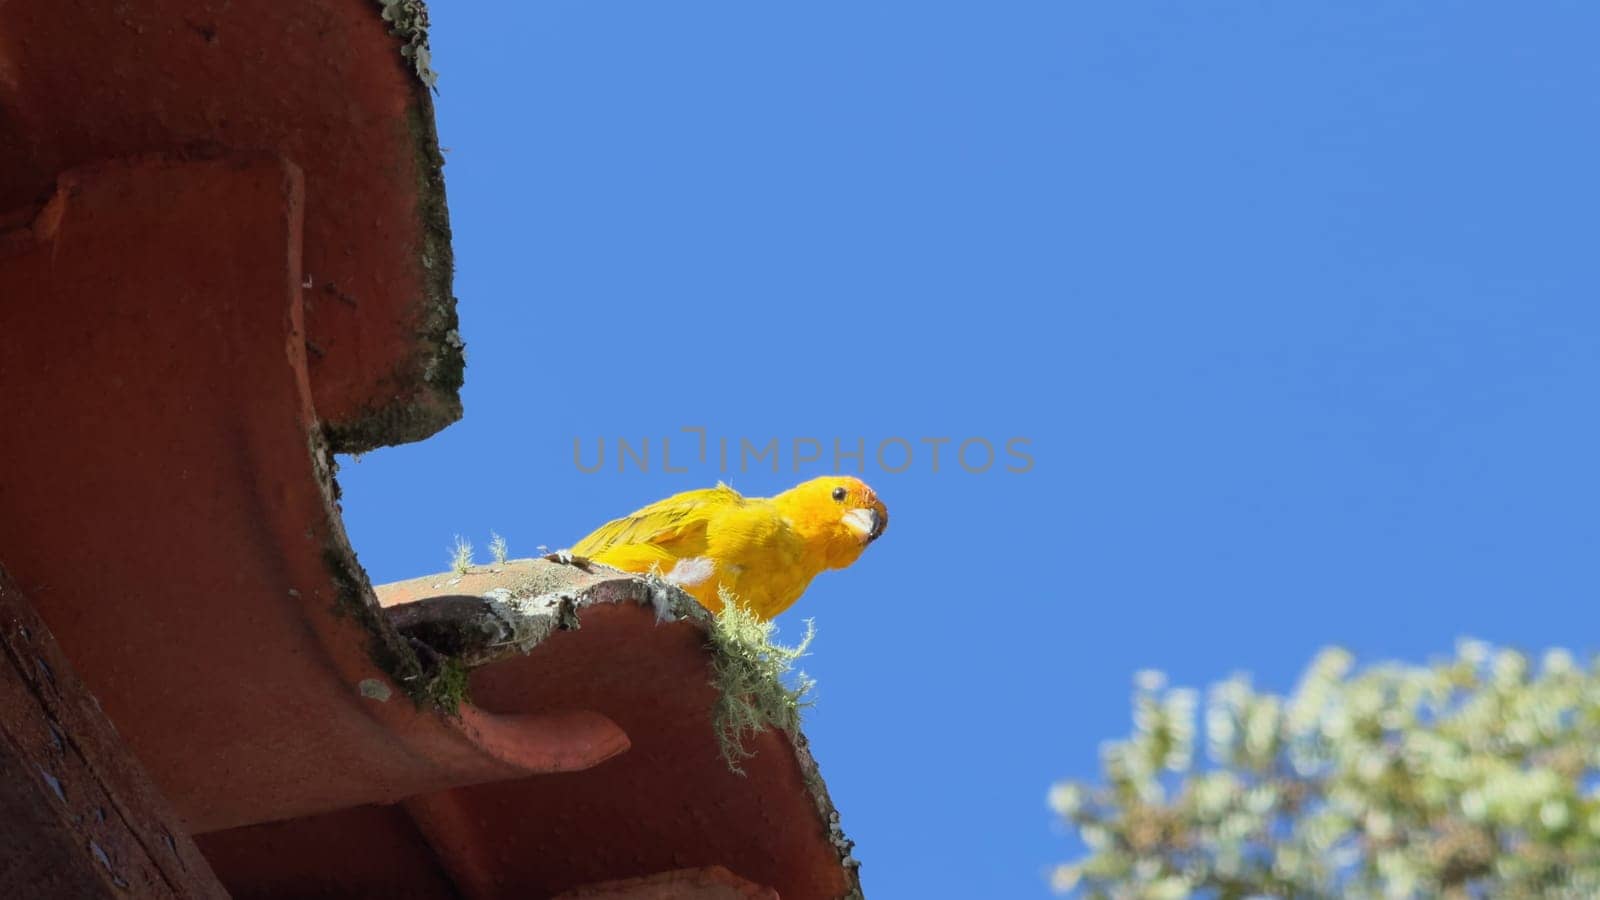 Yellow bird on roof's edge ready to fly in the blue sky.